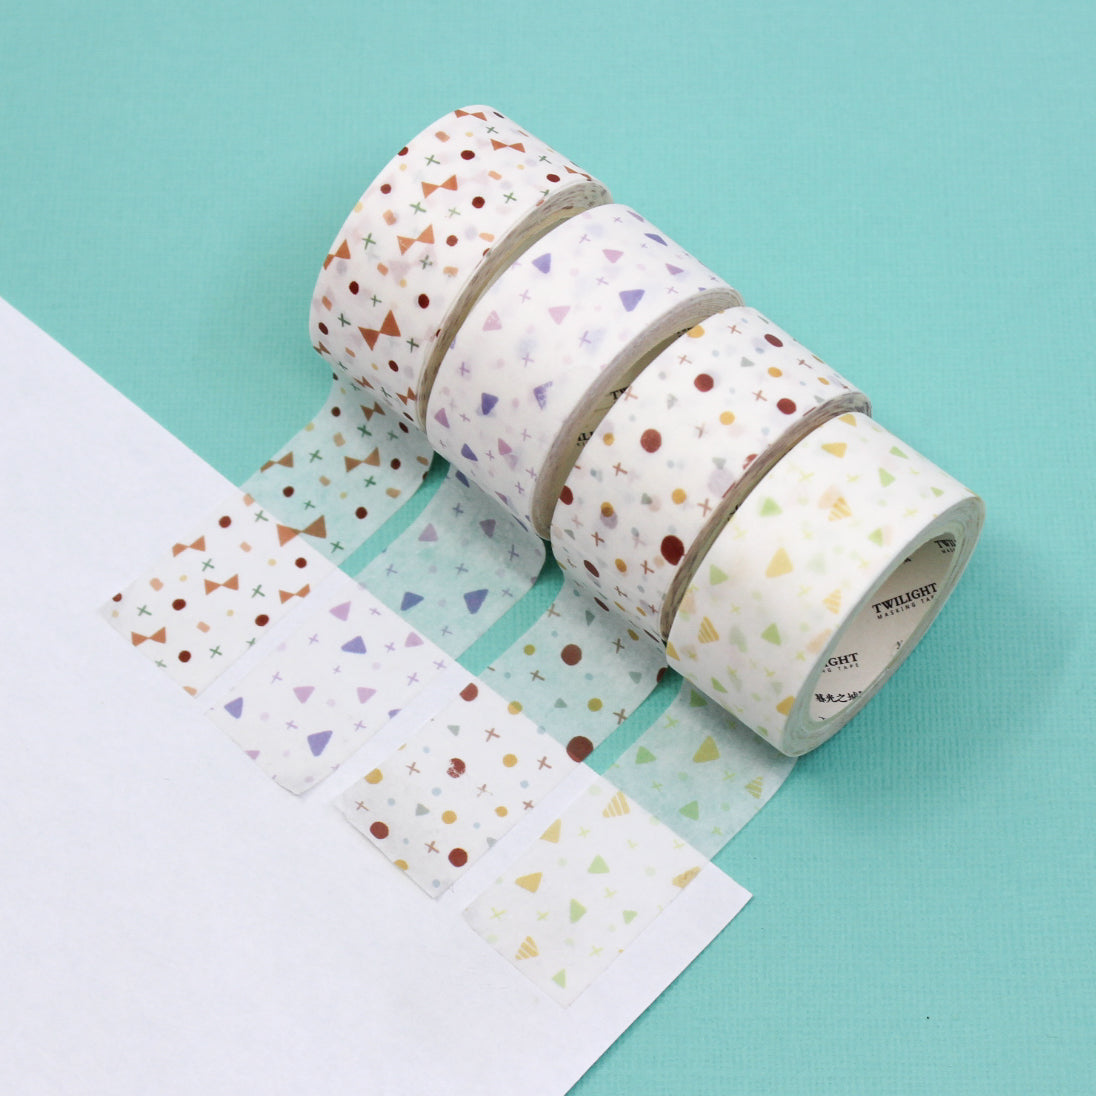 Elevate your crafts with our Colorful Confetti Shapes Washi Tape, featuring a festive array of confetti shapes in vibrant colors. Ideal for adding a fun and celebratory touch to your projects. These tapes are sold at BBB Supplies Craft Shop.